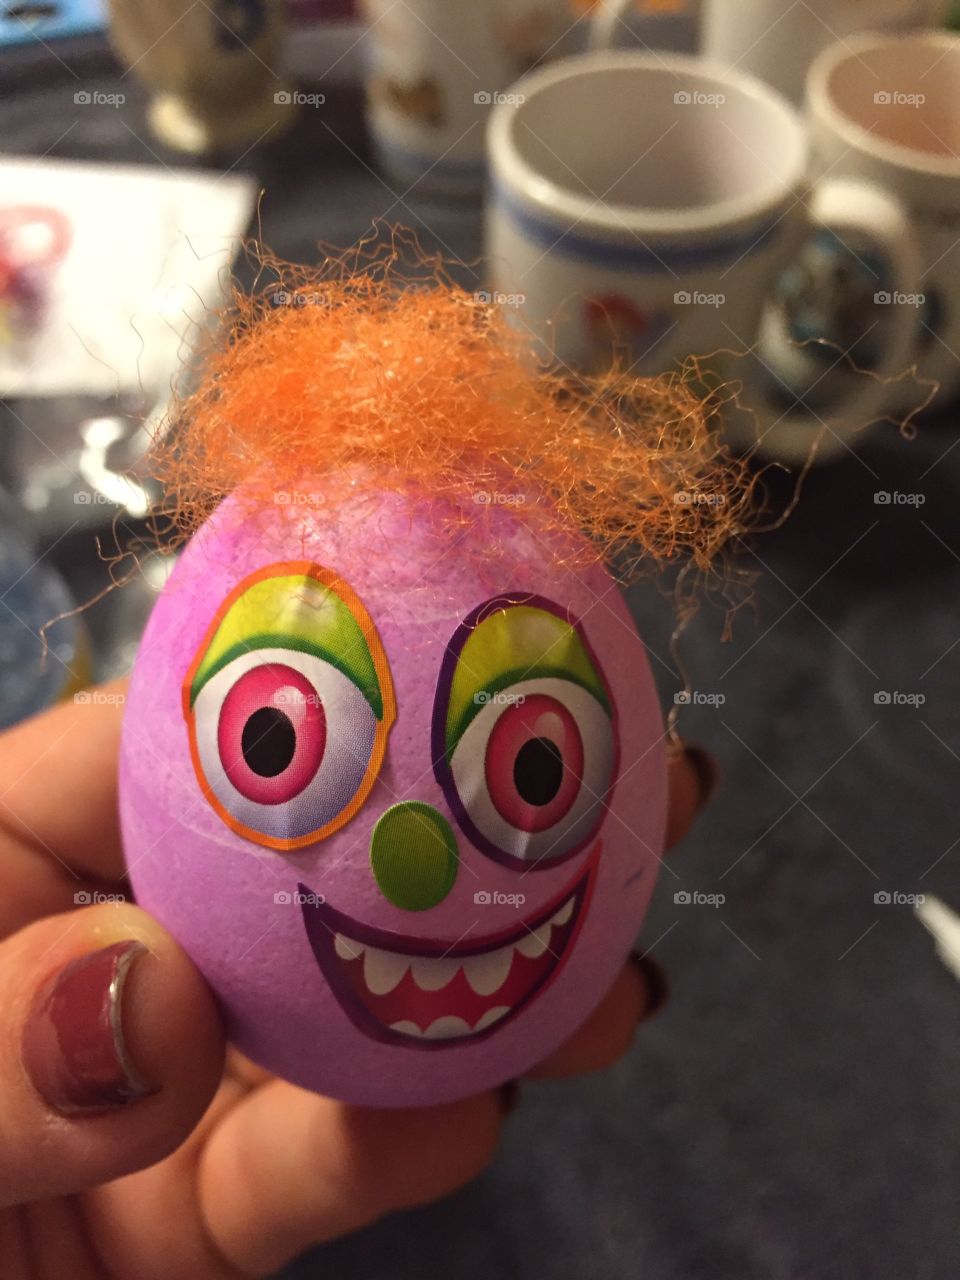 Easter eggs have hair these days?